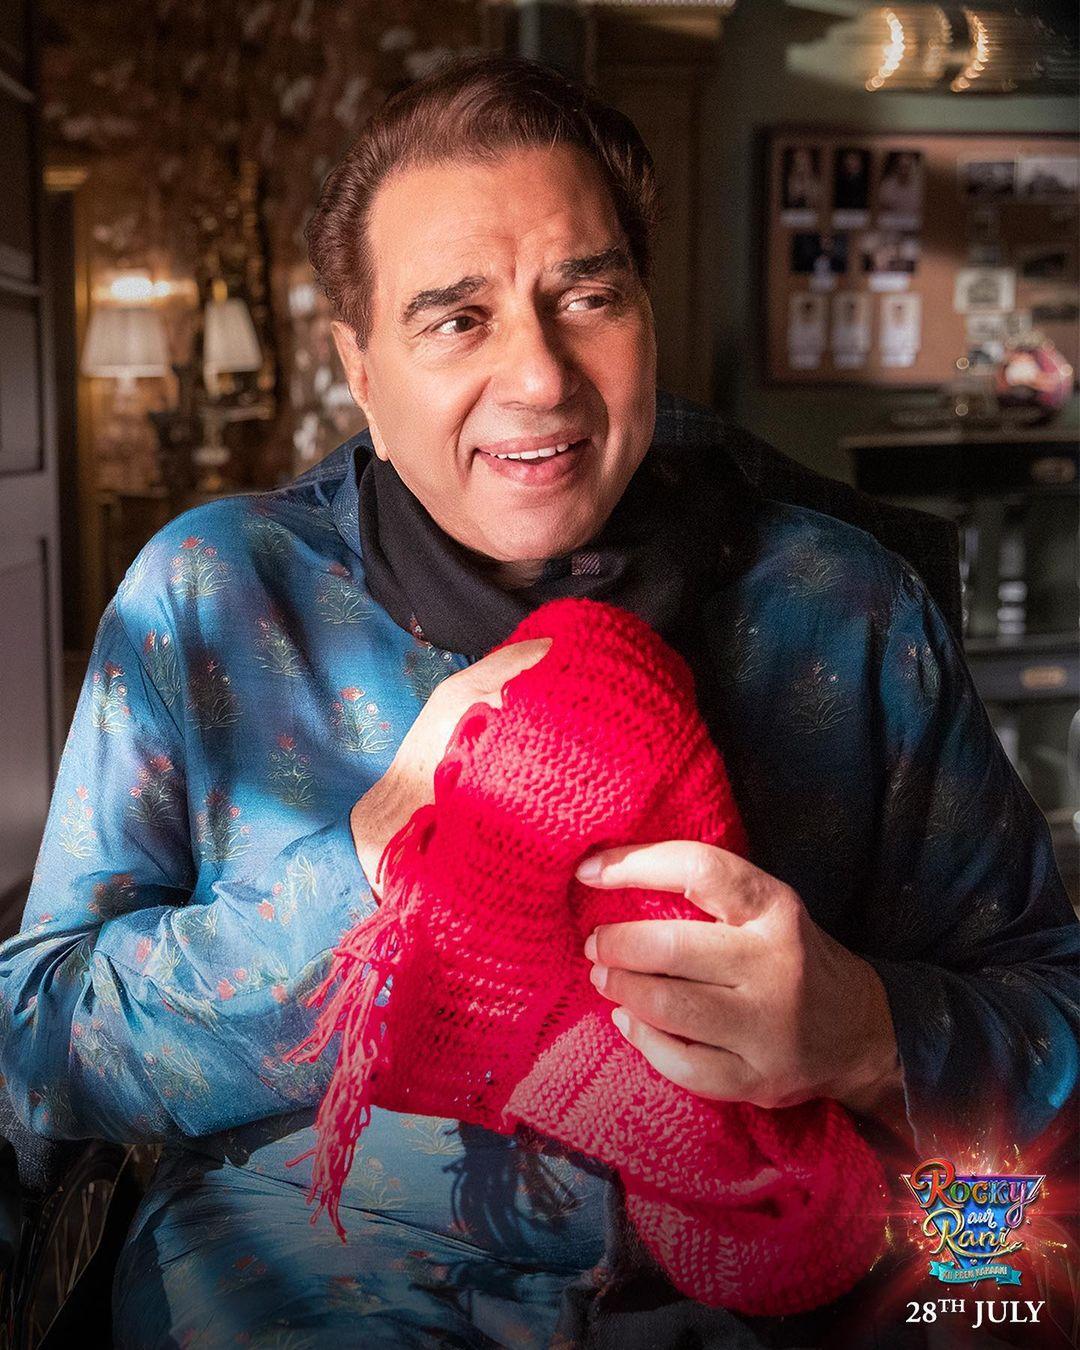 Dharmendra, who will be seen on screen after a long time, is also seen clutching a red scarf in the new still, adding to the intrigue